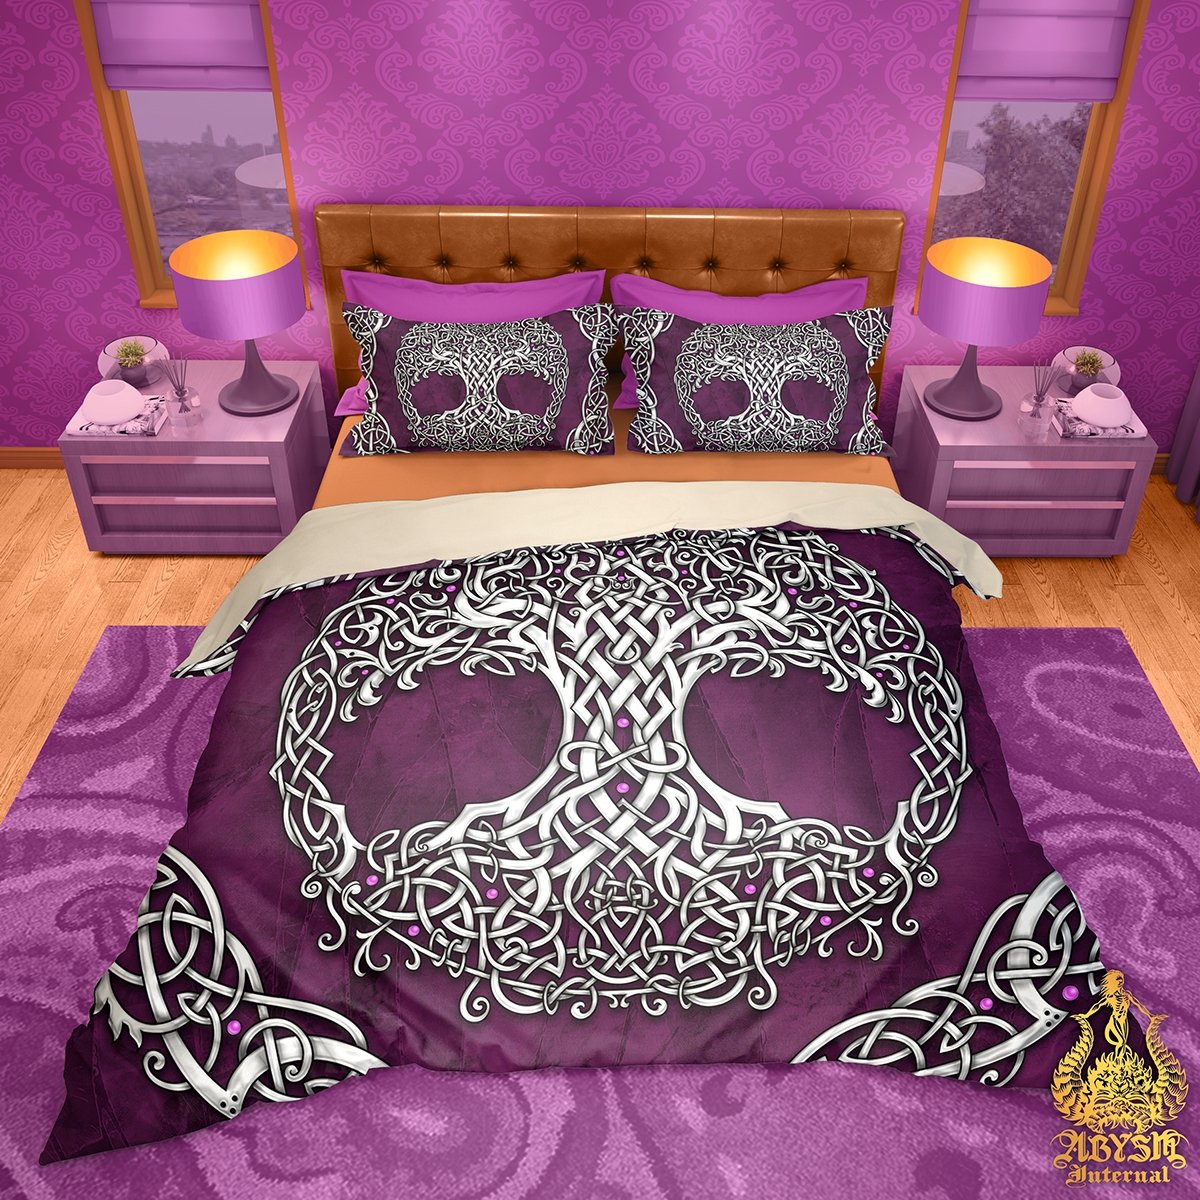 Tree of Life Bedding Set, Comforter and Duvet, Indie Bed Cover, Witchy Bedroom Decor King, Queen and Twin Size - Celtic, White and Purple - Abysm Internal